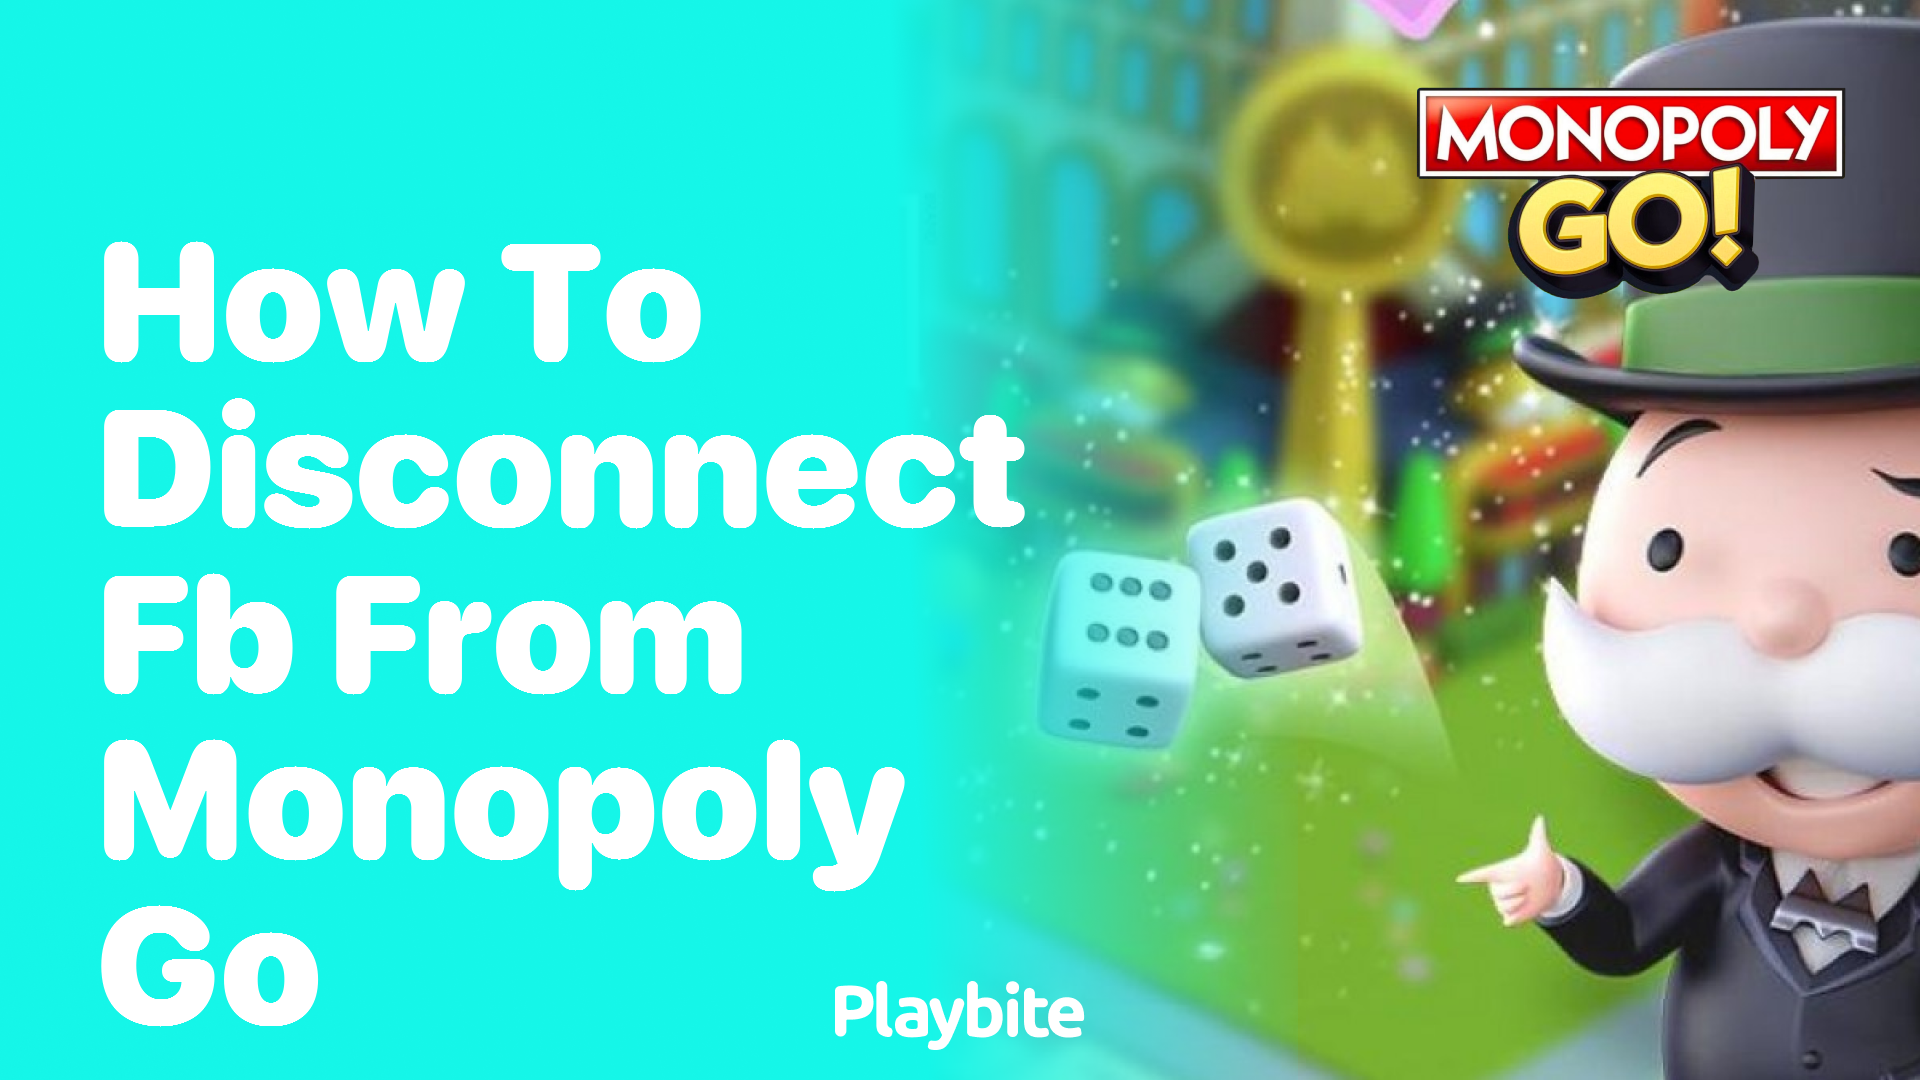 How to Disconnect FB from Monopoly Go: A Simple Guide